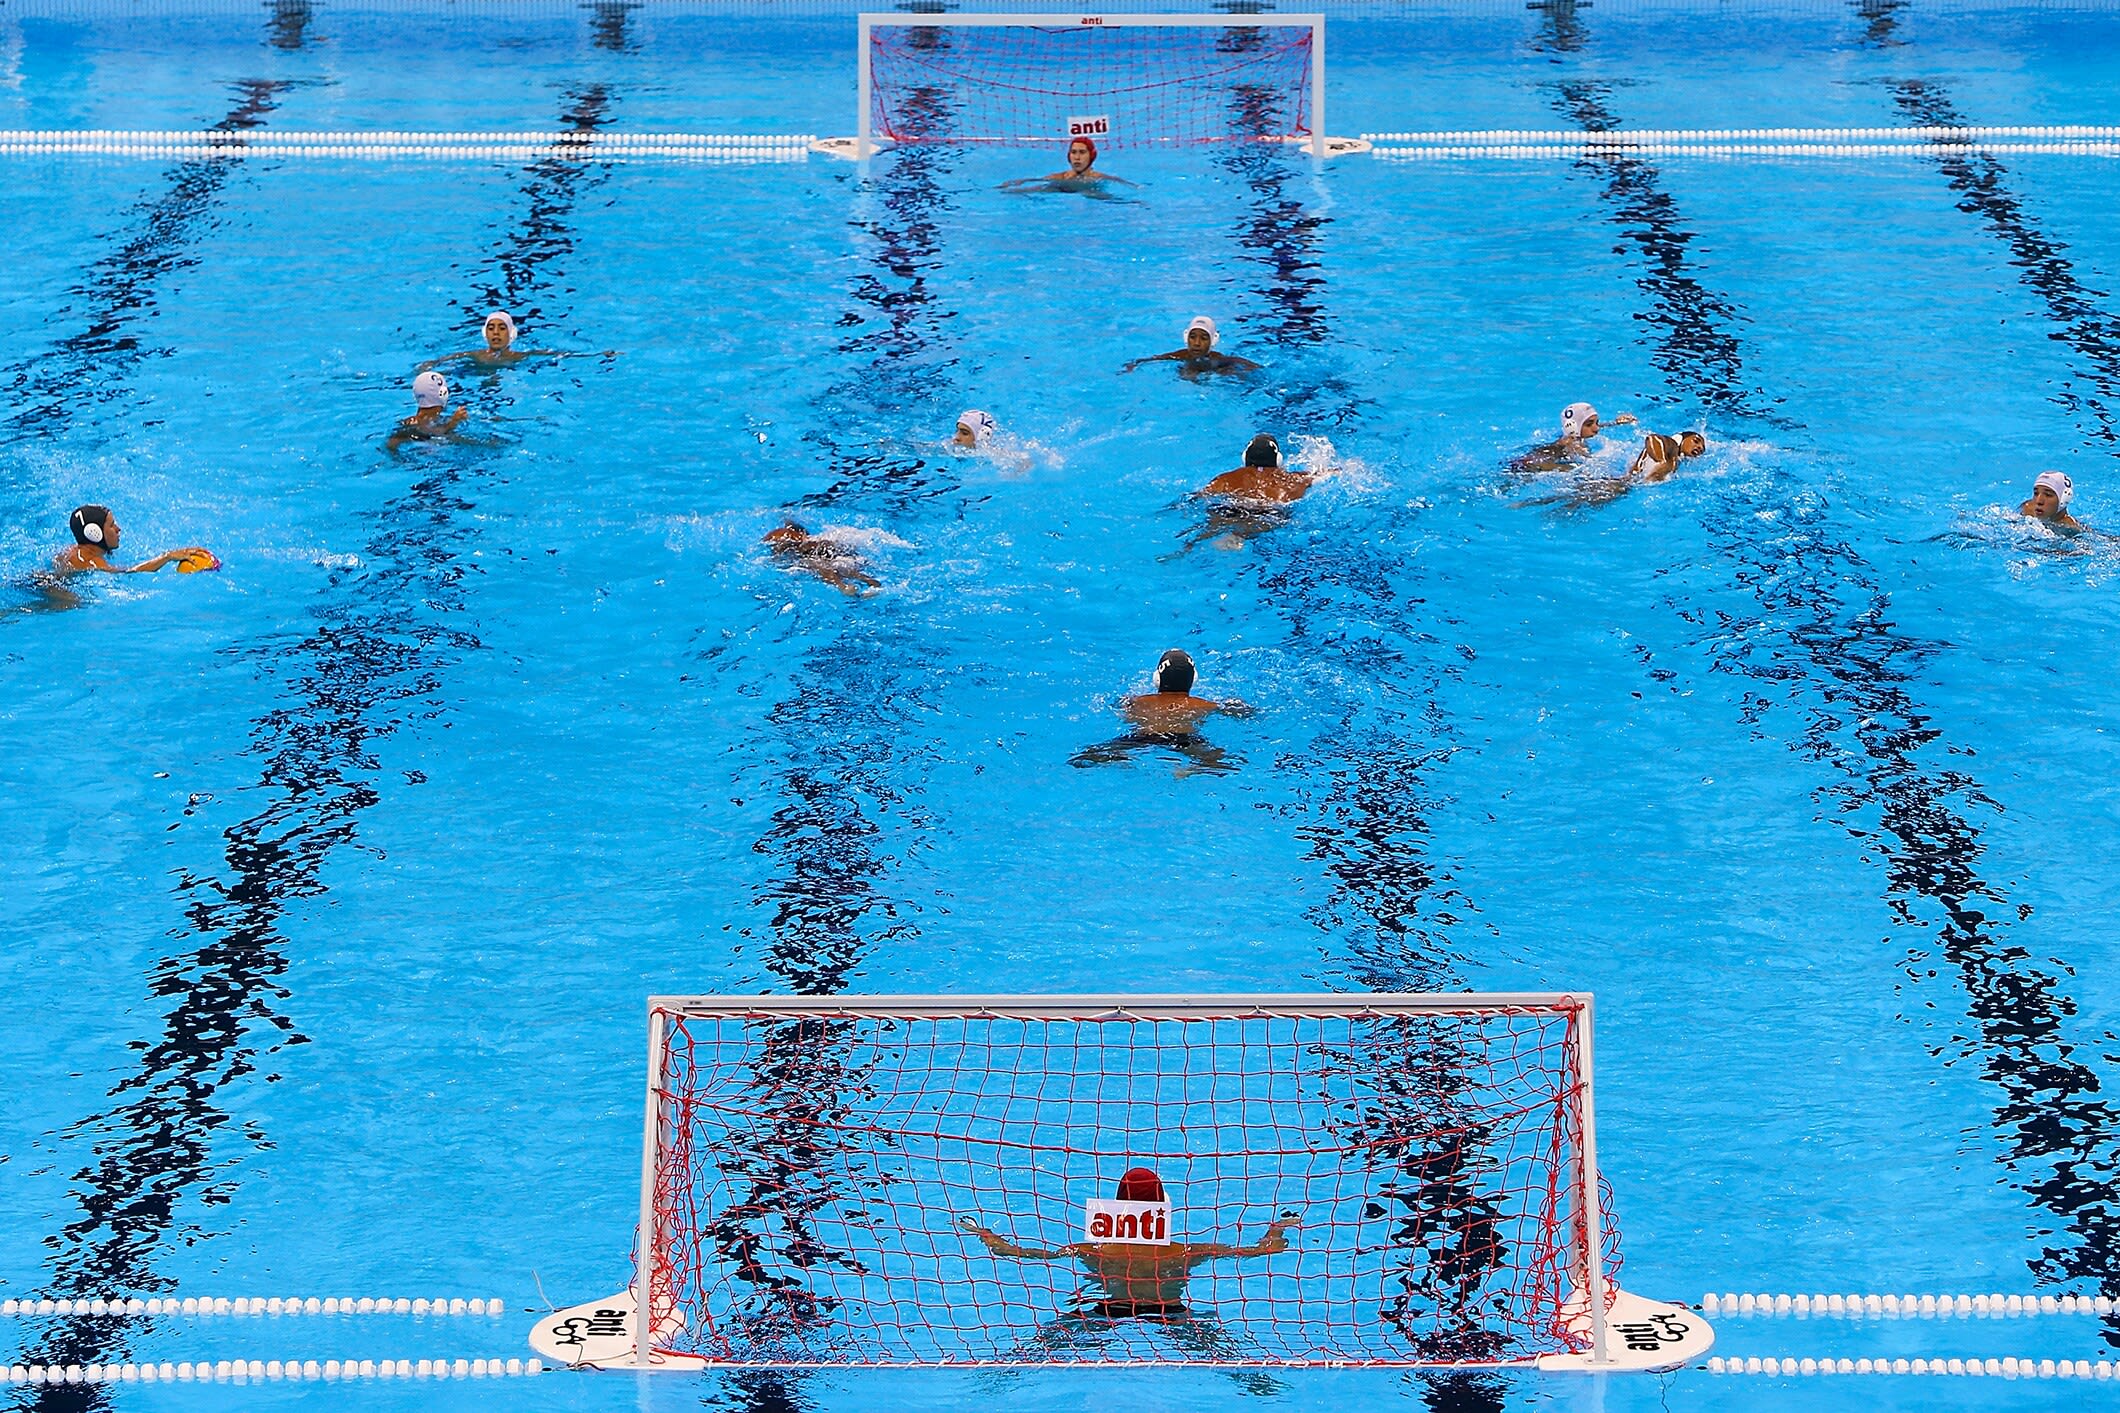 Rio 2016: Local clubs put water polo facilities to the test